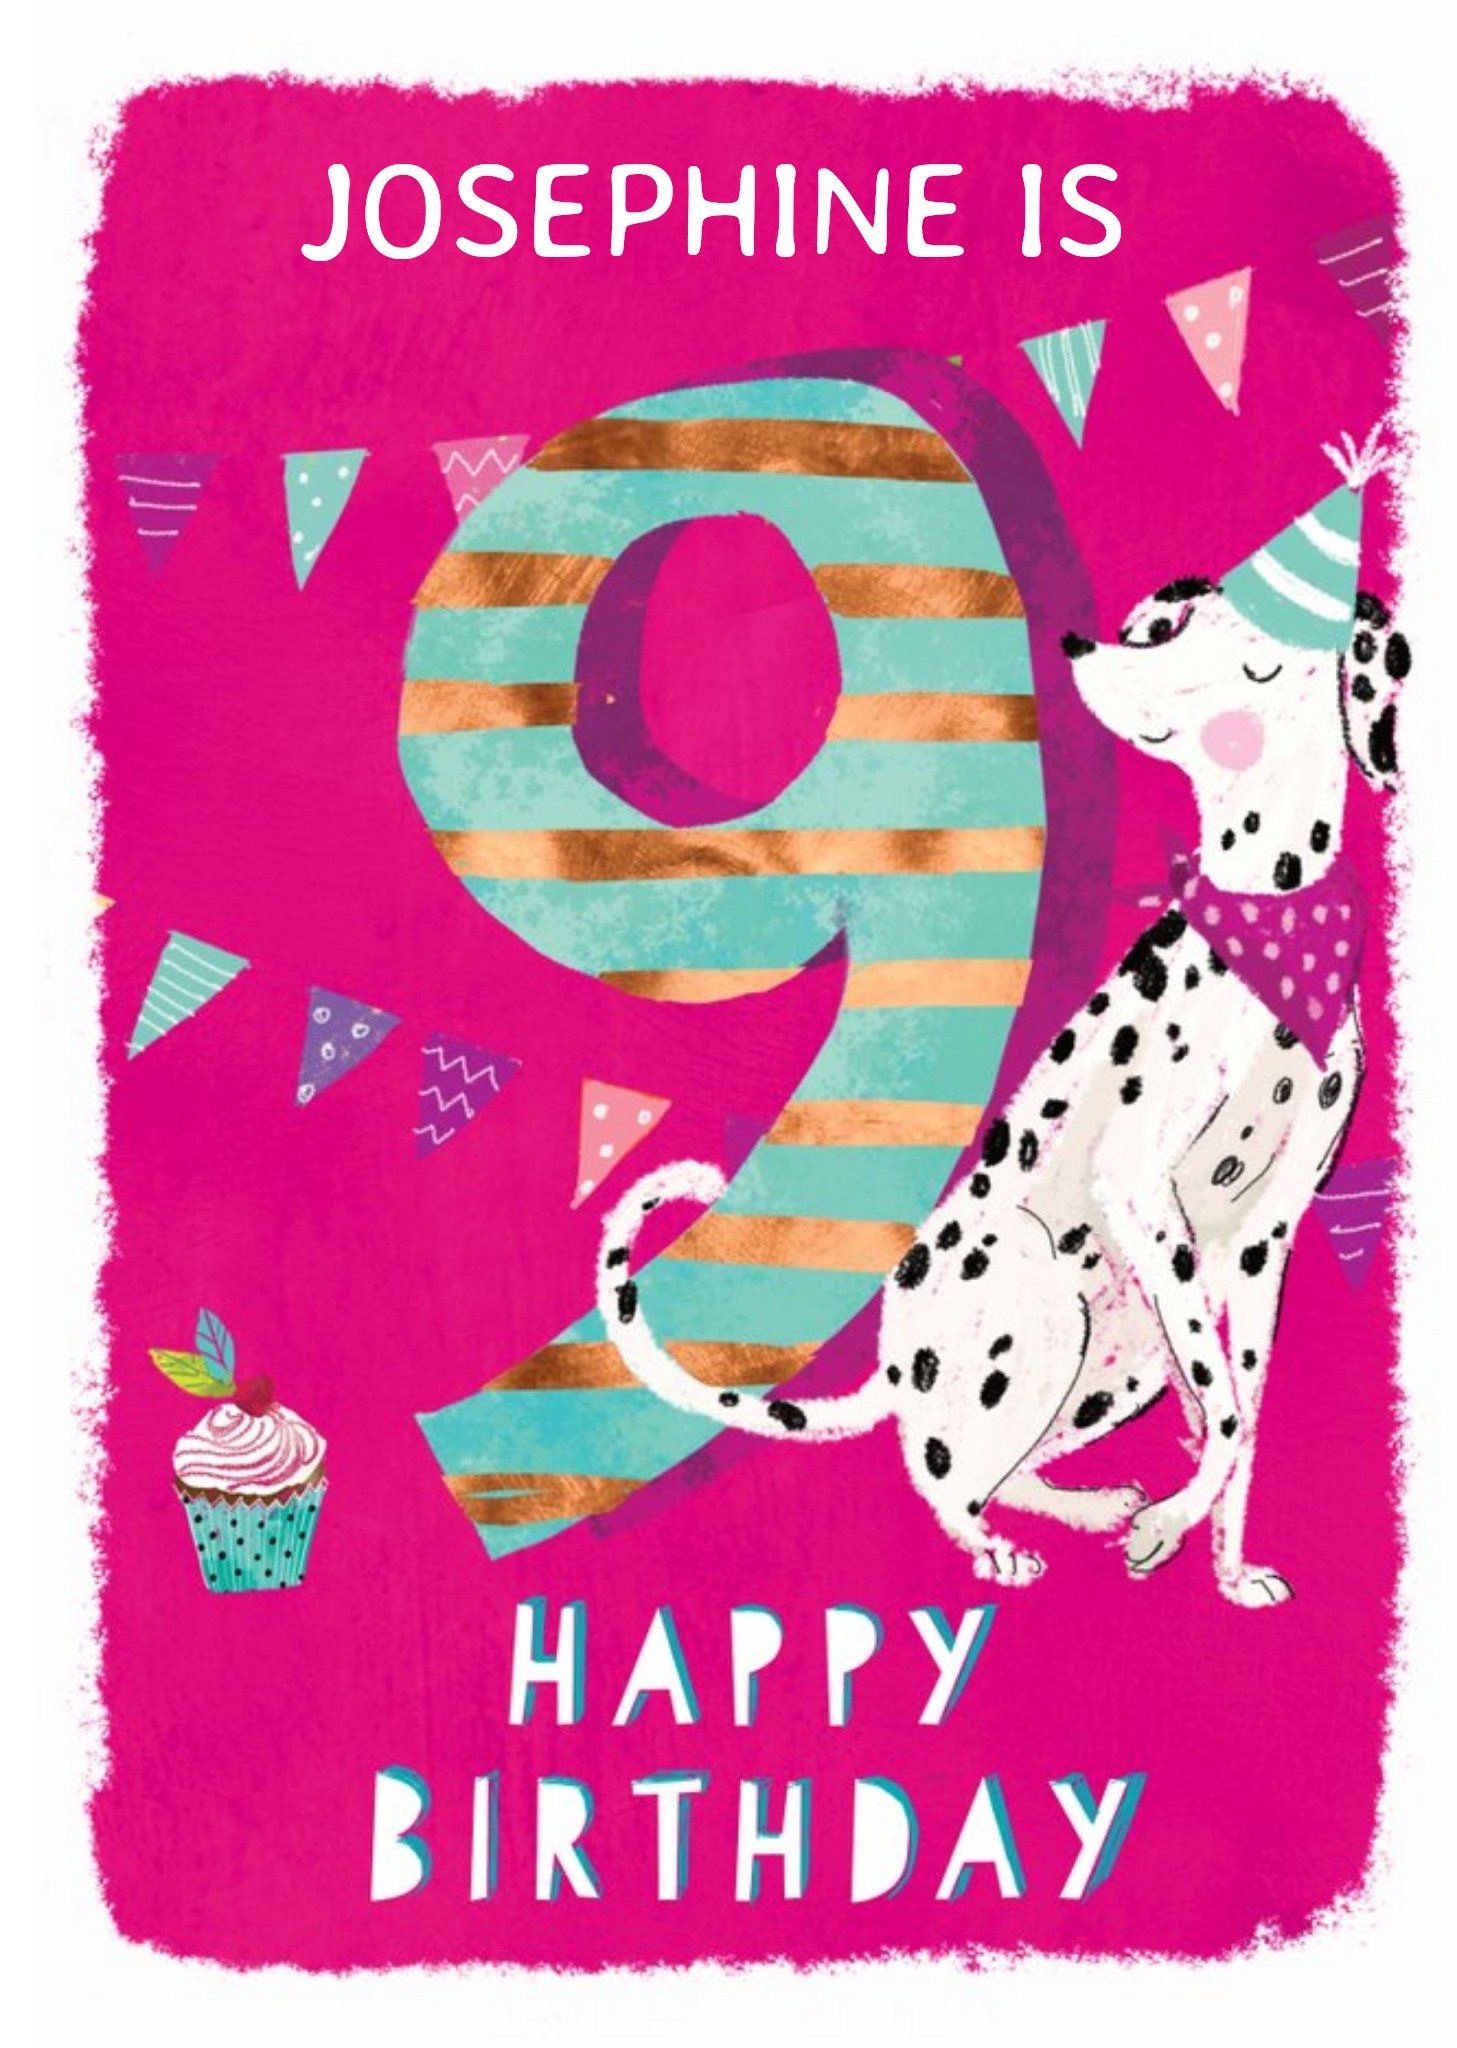 Ling Design - Kids Happy Birthday Card - Dalmatian Dog - 9 Today, Large